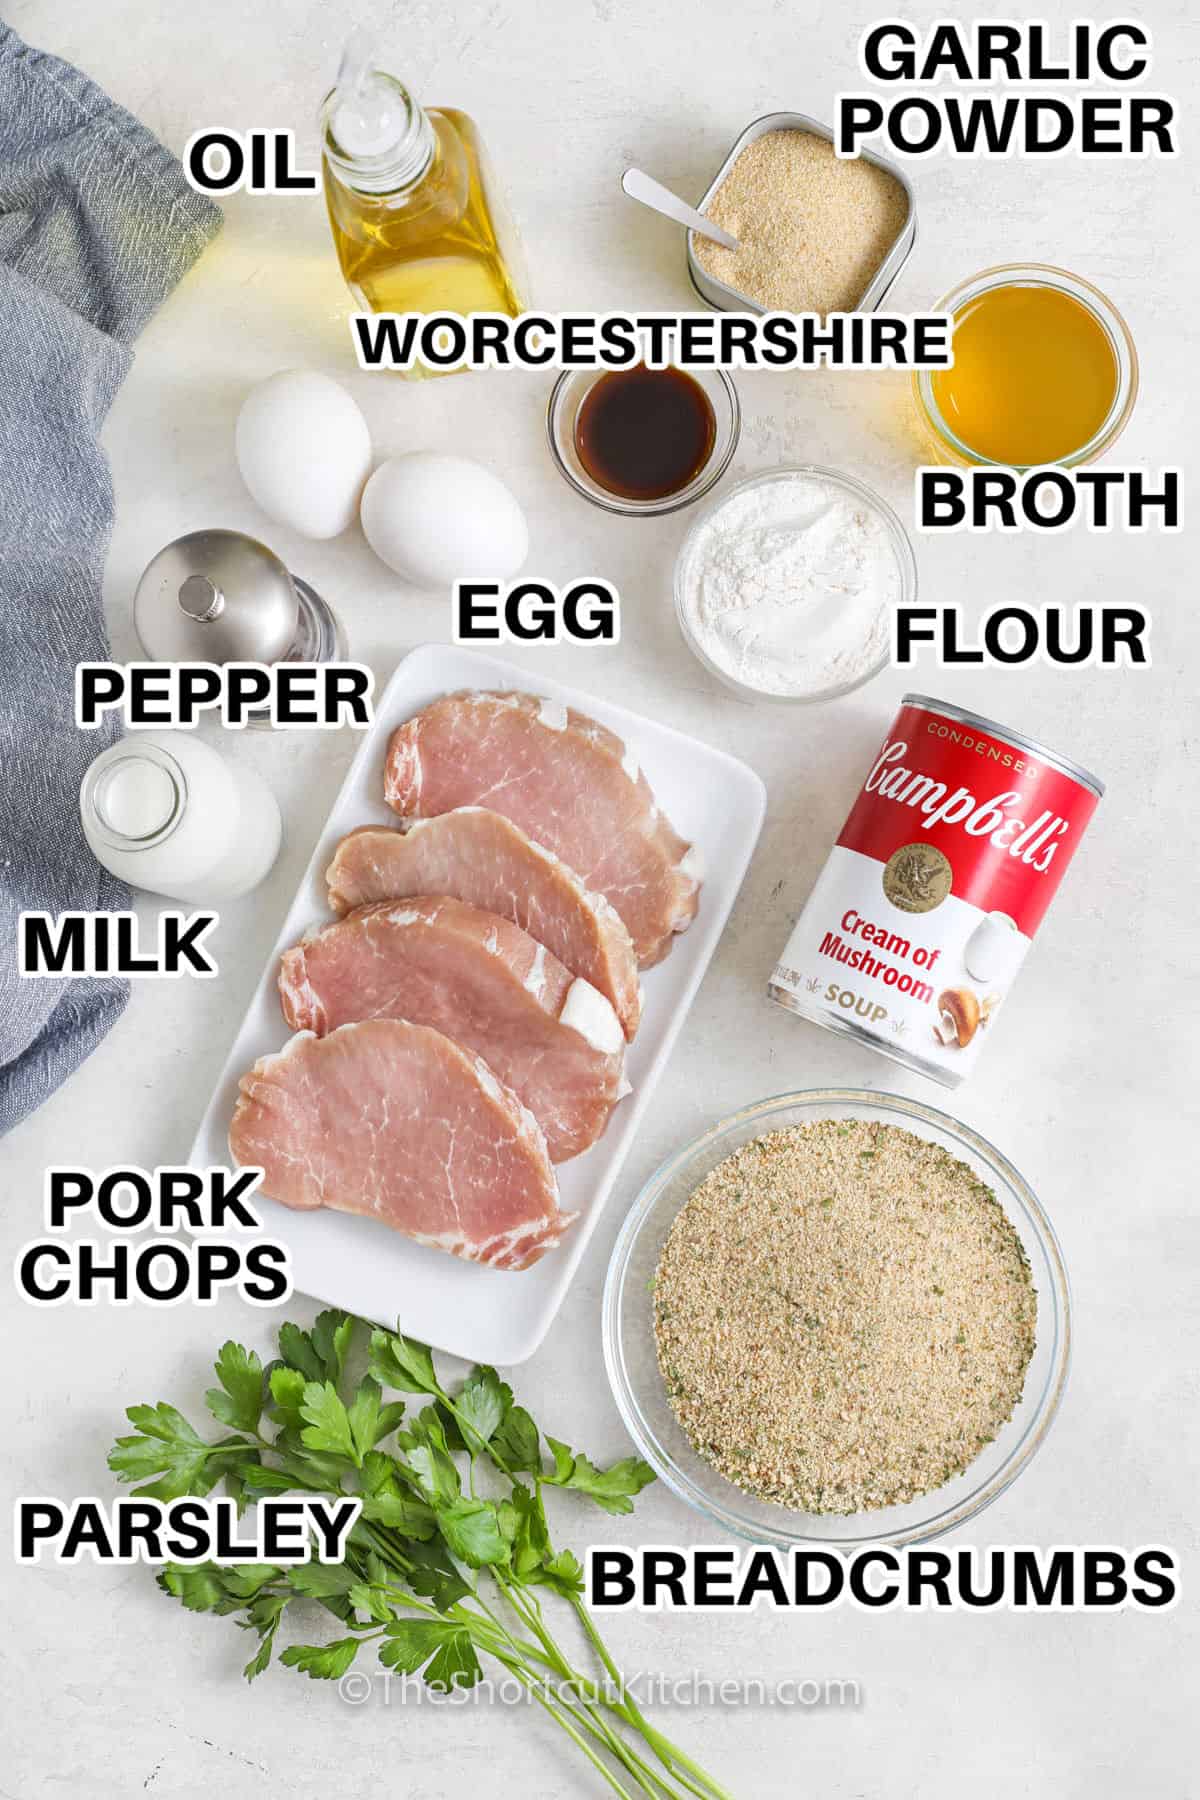 oil , worcestershire , garlic powder ,broth , flour , egg , pepper , milk , pork chops , breadcrumbs , parsley with labels to make Oven Baked Pork Chops